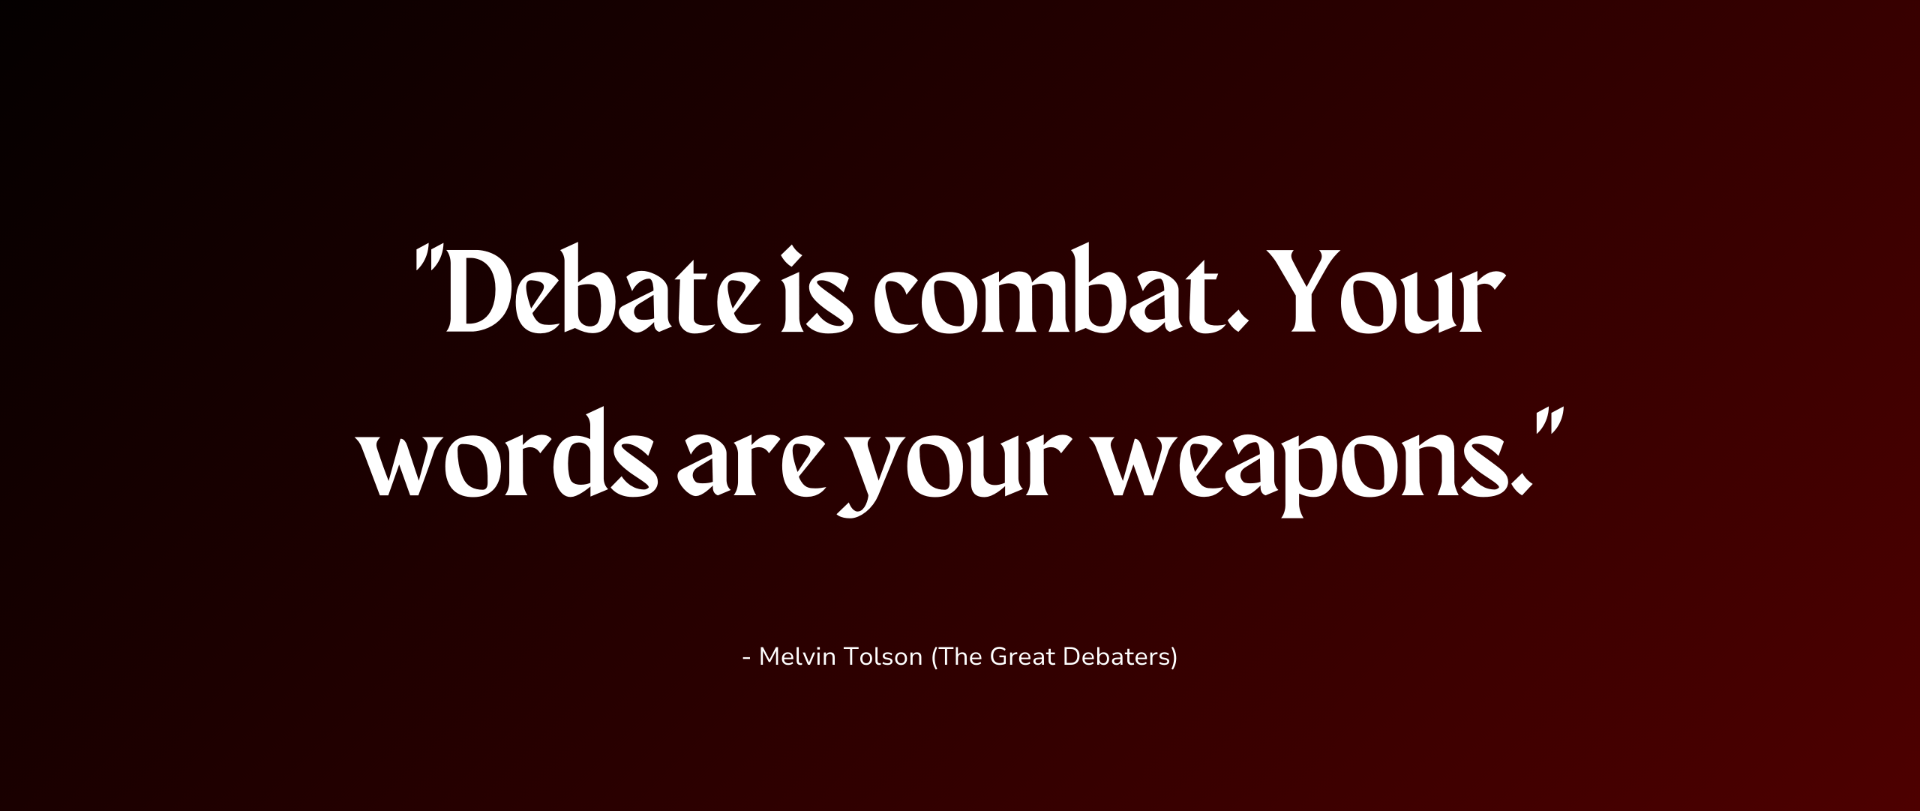 debate is combat. your words are your weapons.